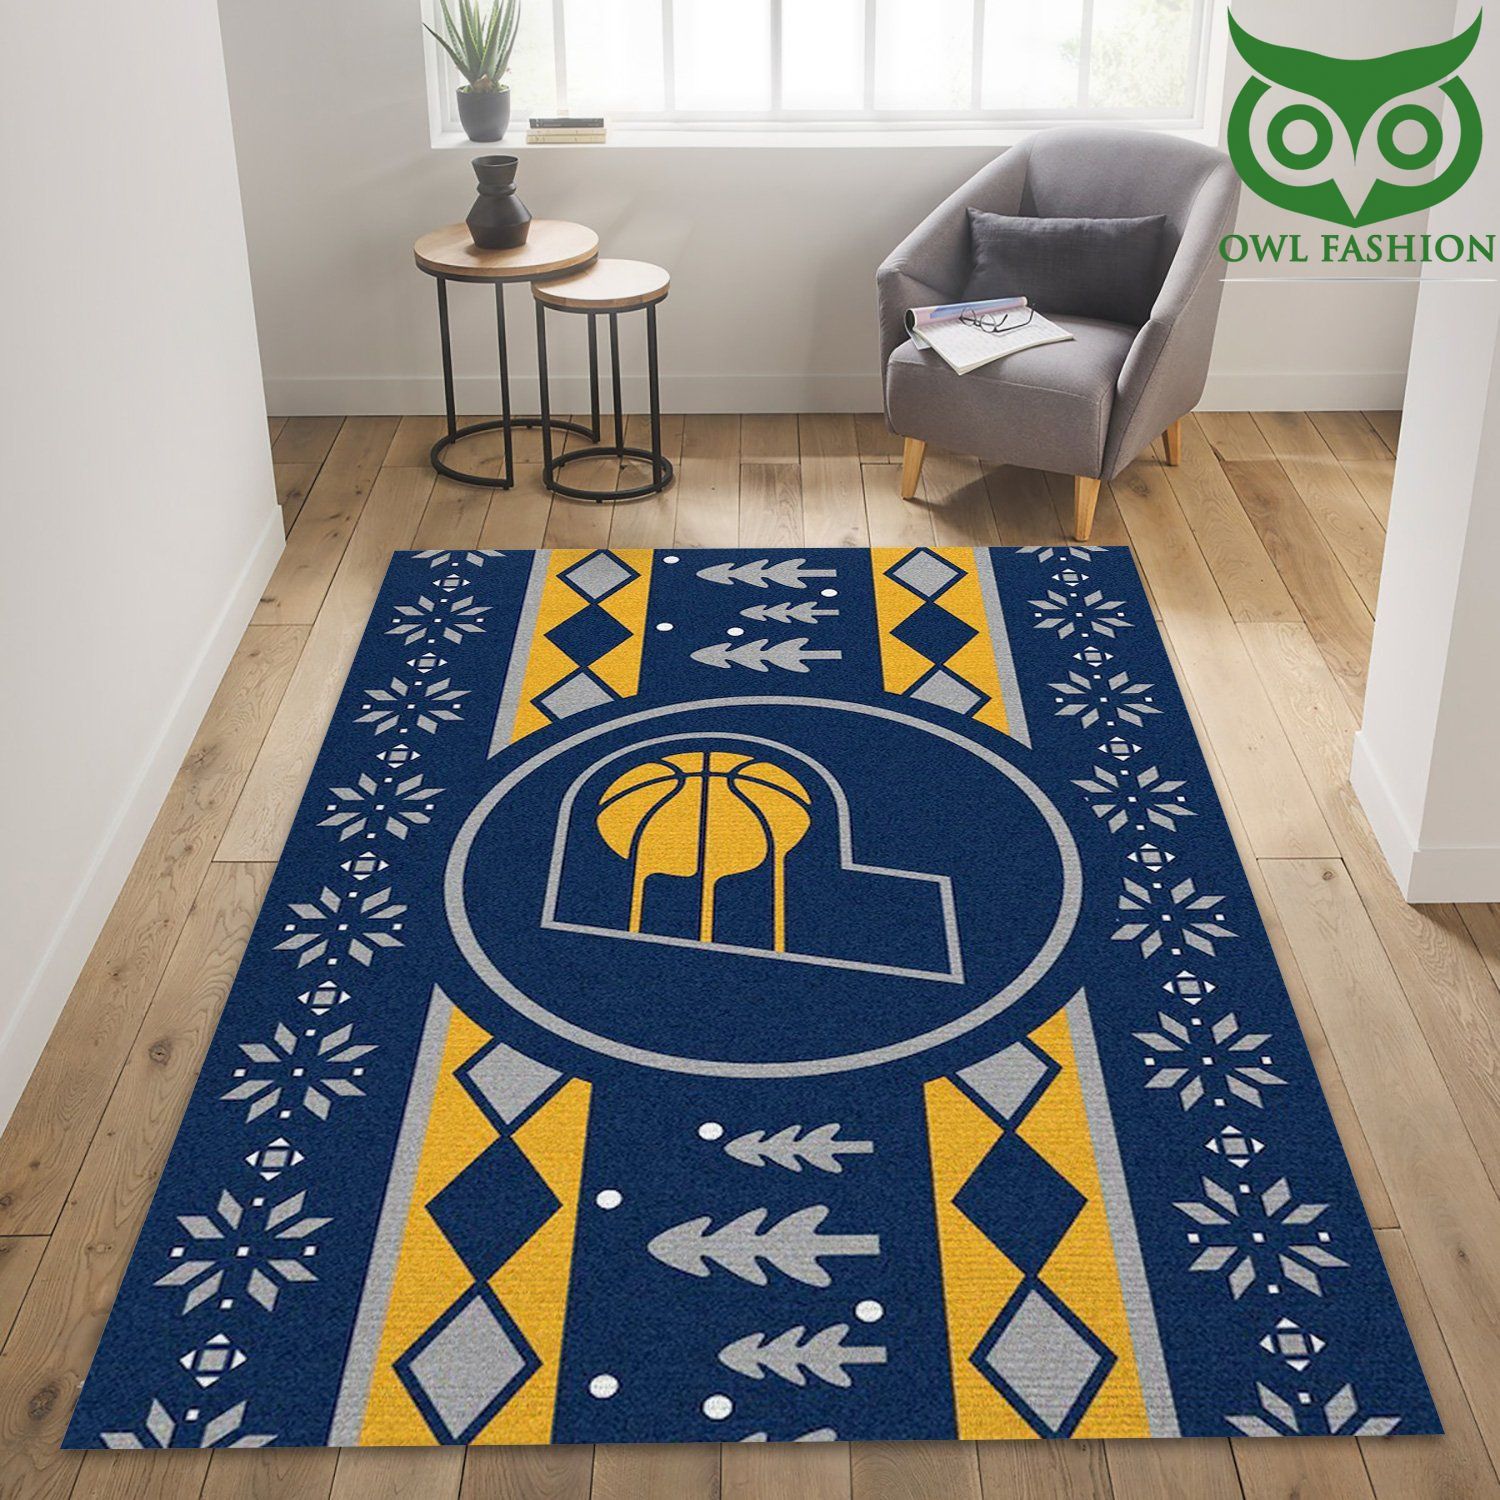 42 Indiana Pacers Area Rug NBA carpet rug Home and floor Decoration